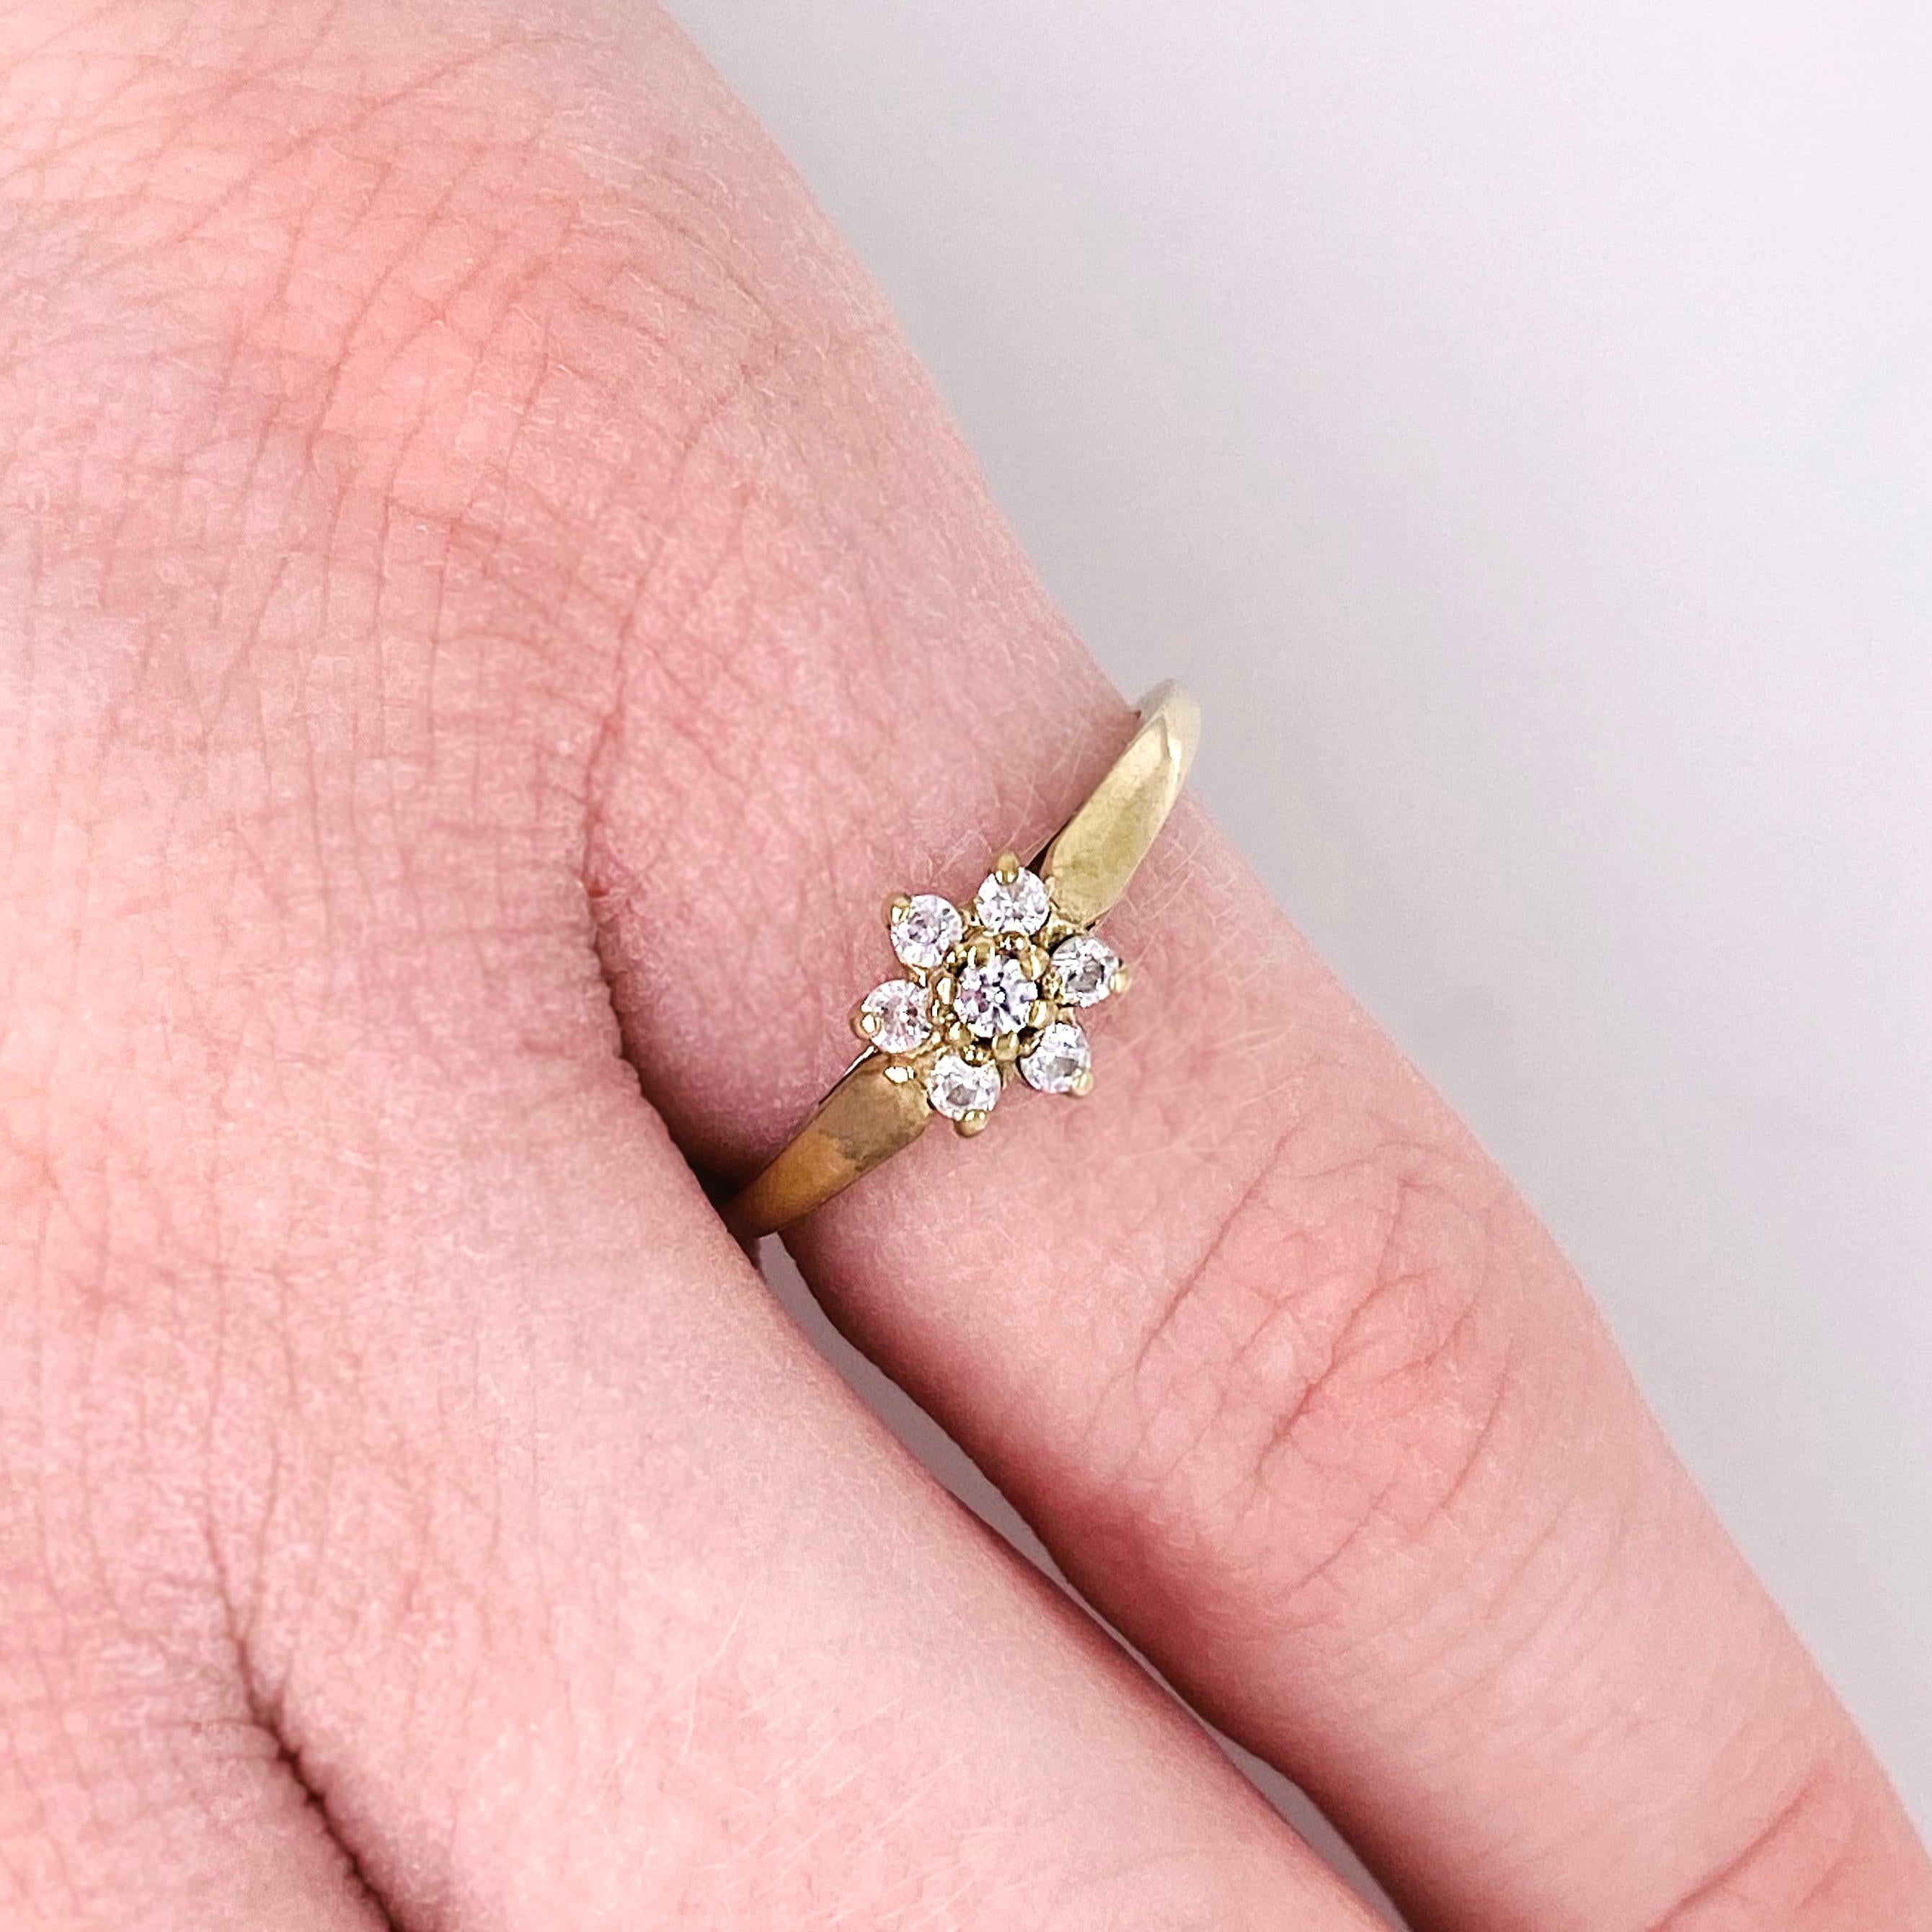 The precious natural diamond flower ring has a flower design that is made with genuine, natural round diamond 